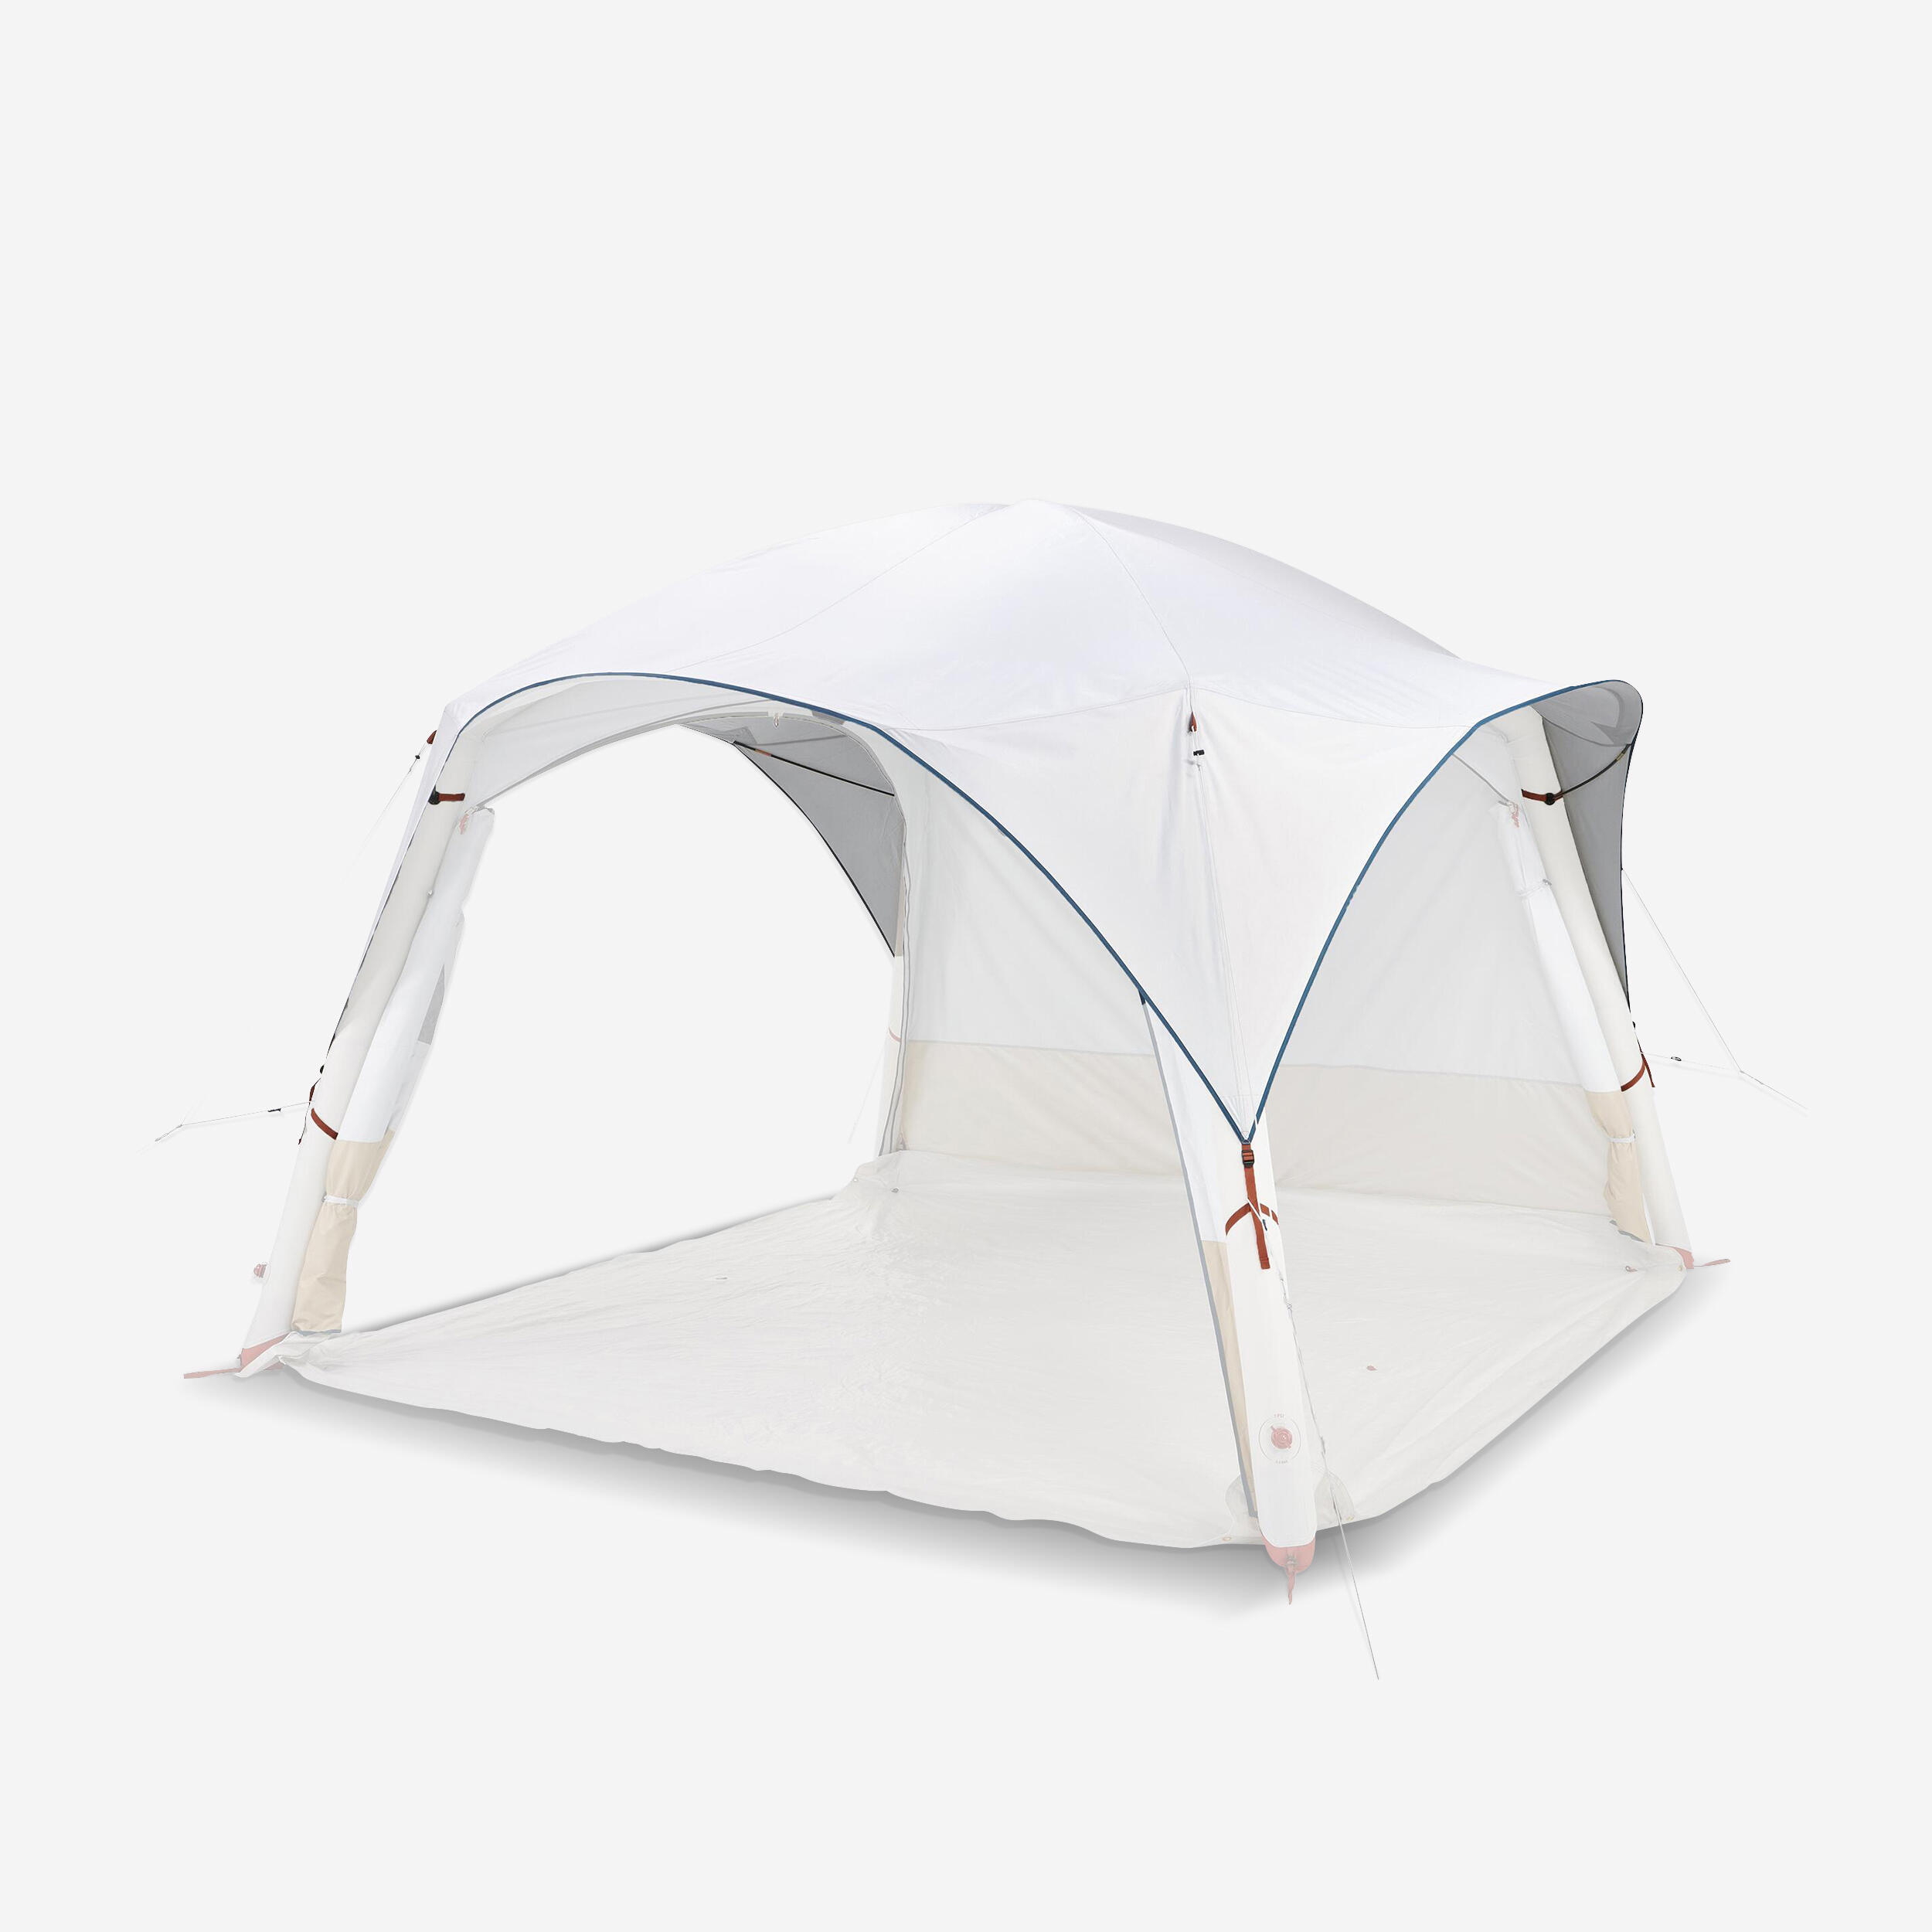 QUECHUA TOP DOUBLE FLYSHEET - SPARE PART FOR THE BASE AIR SECONDS FRESH LIVING AREA